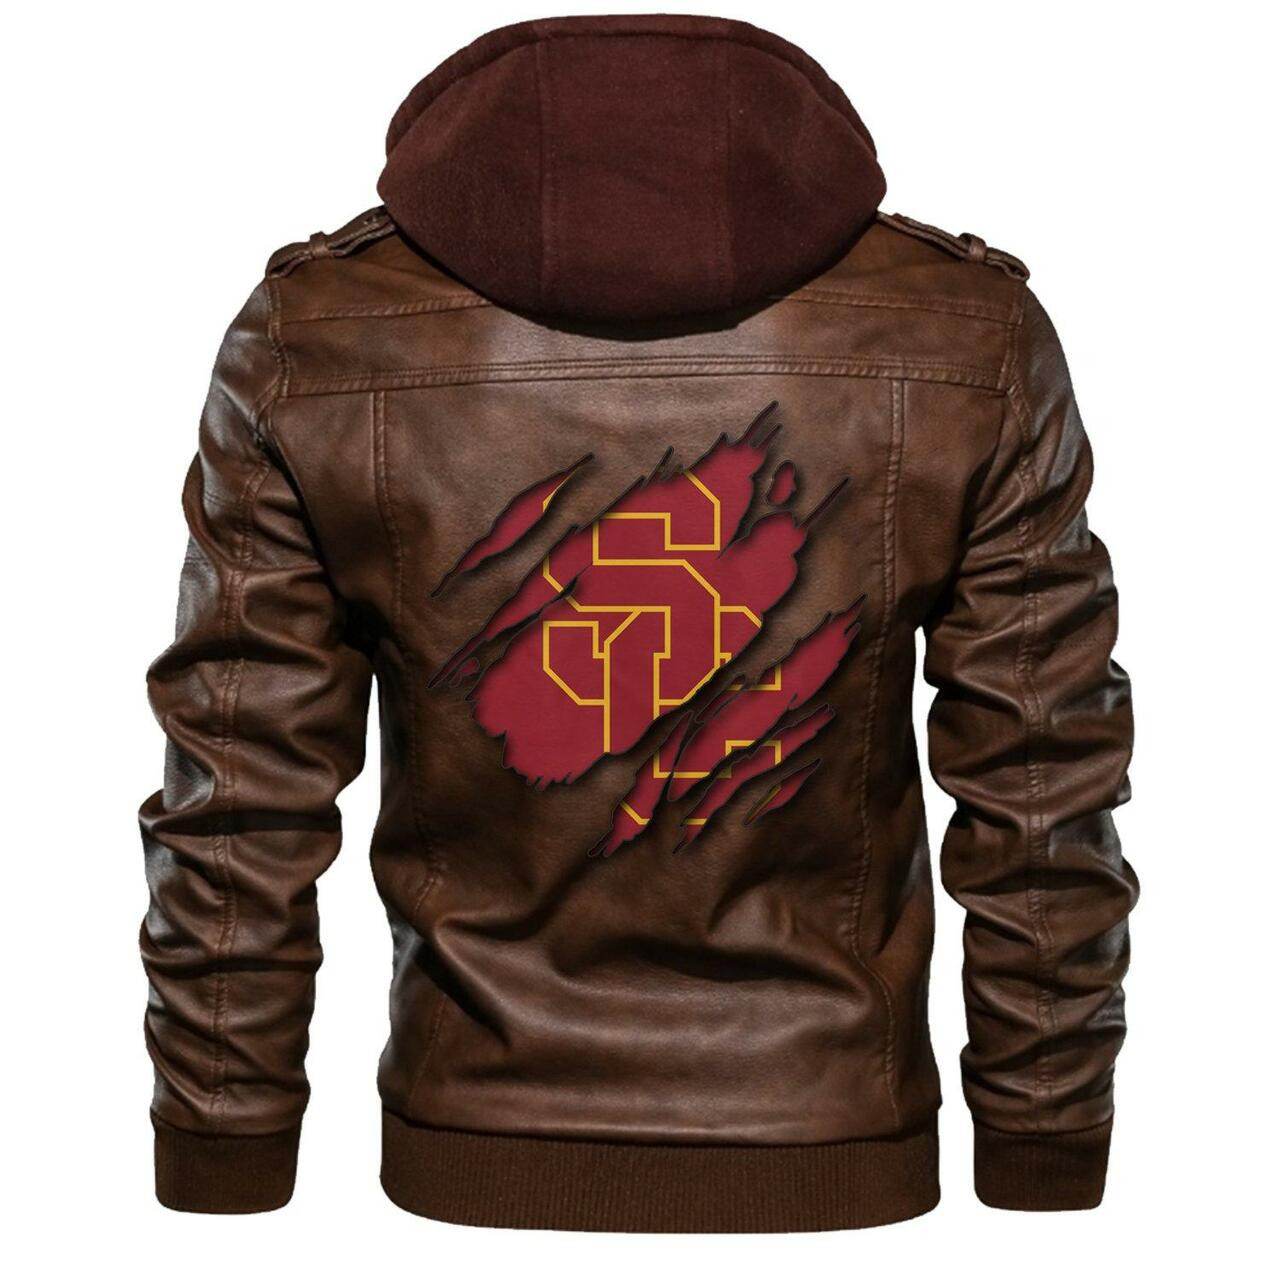 This leather Jacket will look great on you and make you stand out from the crowd 79